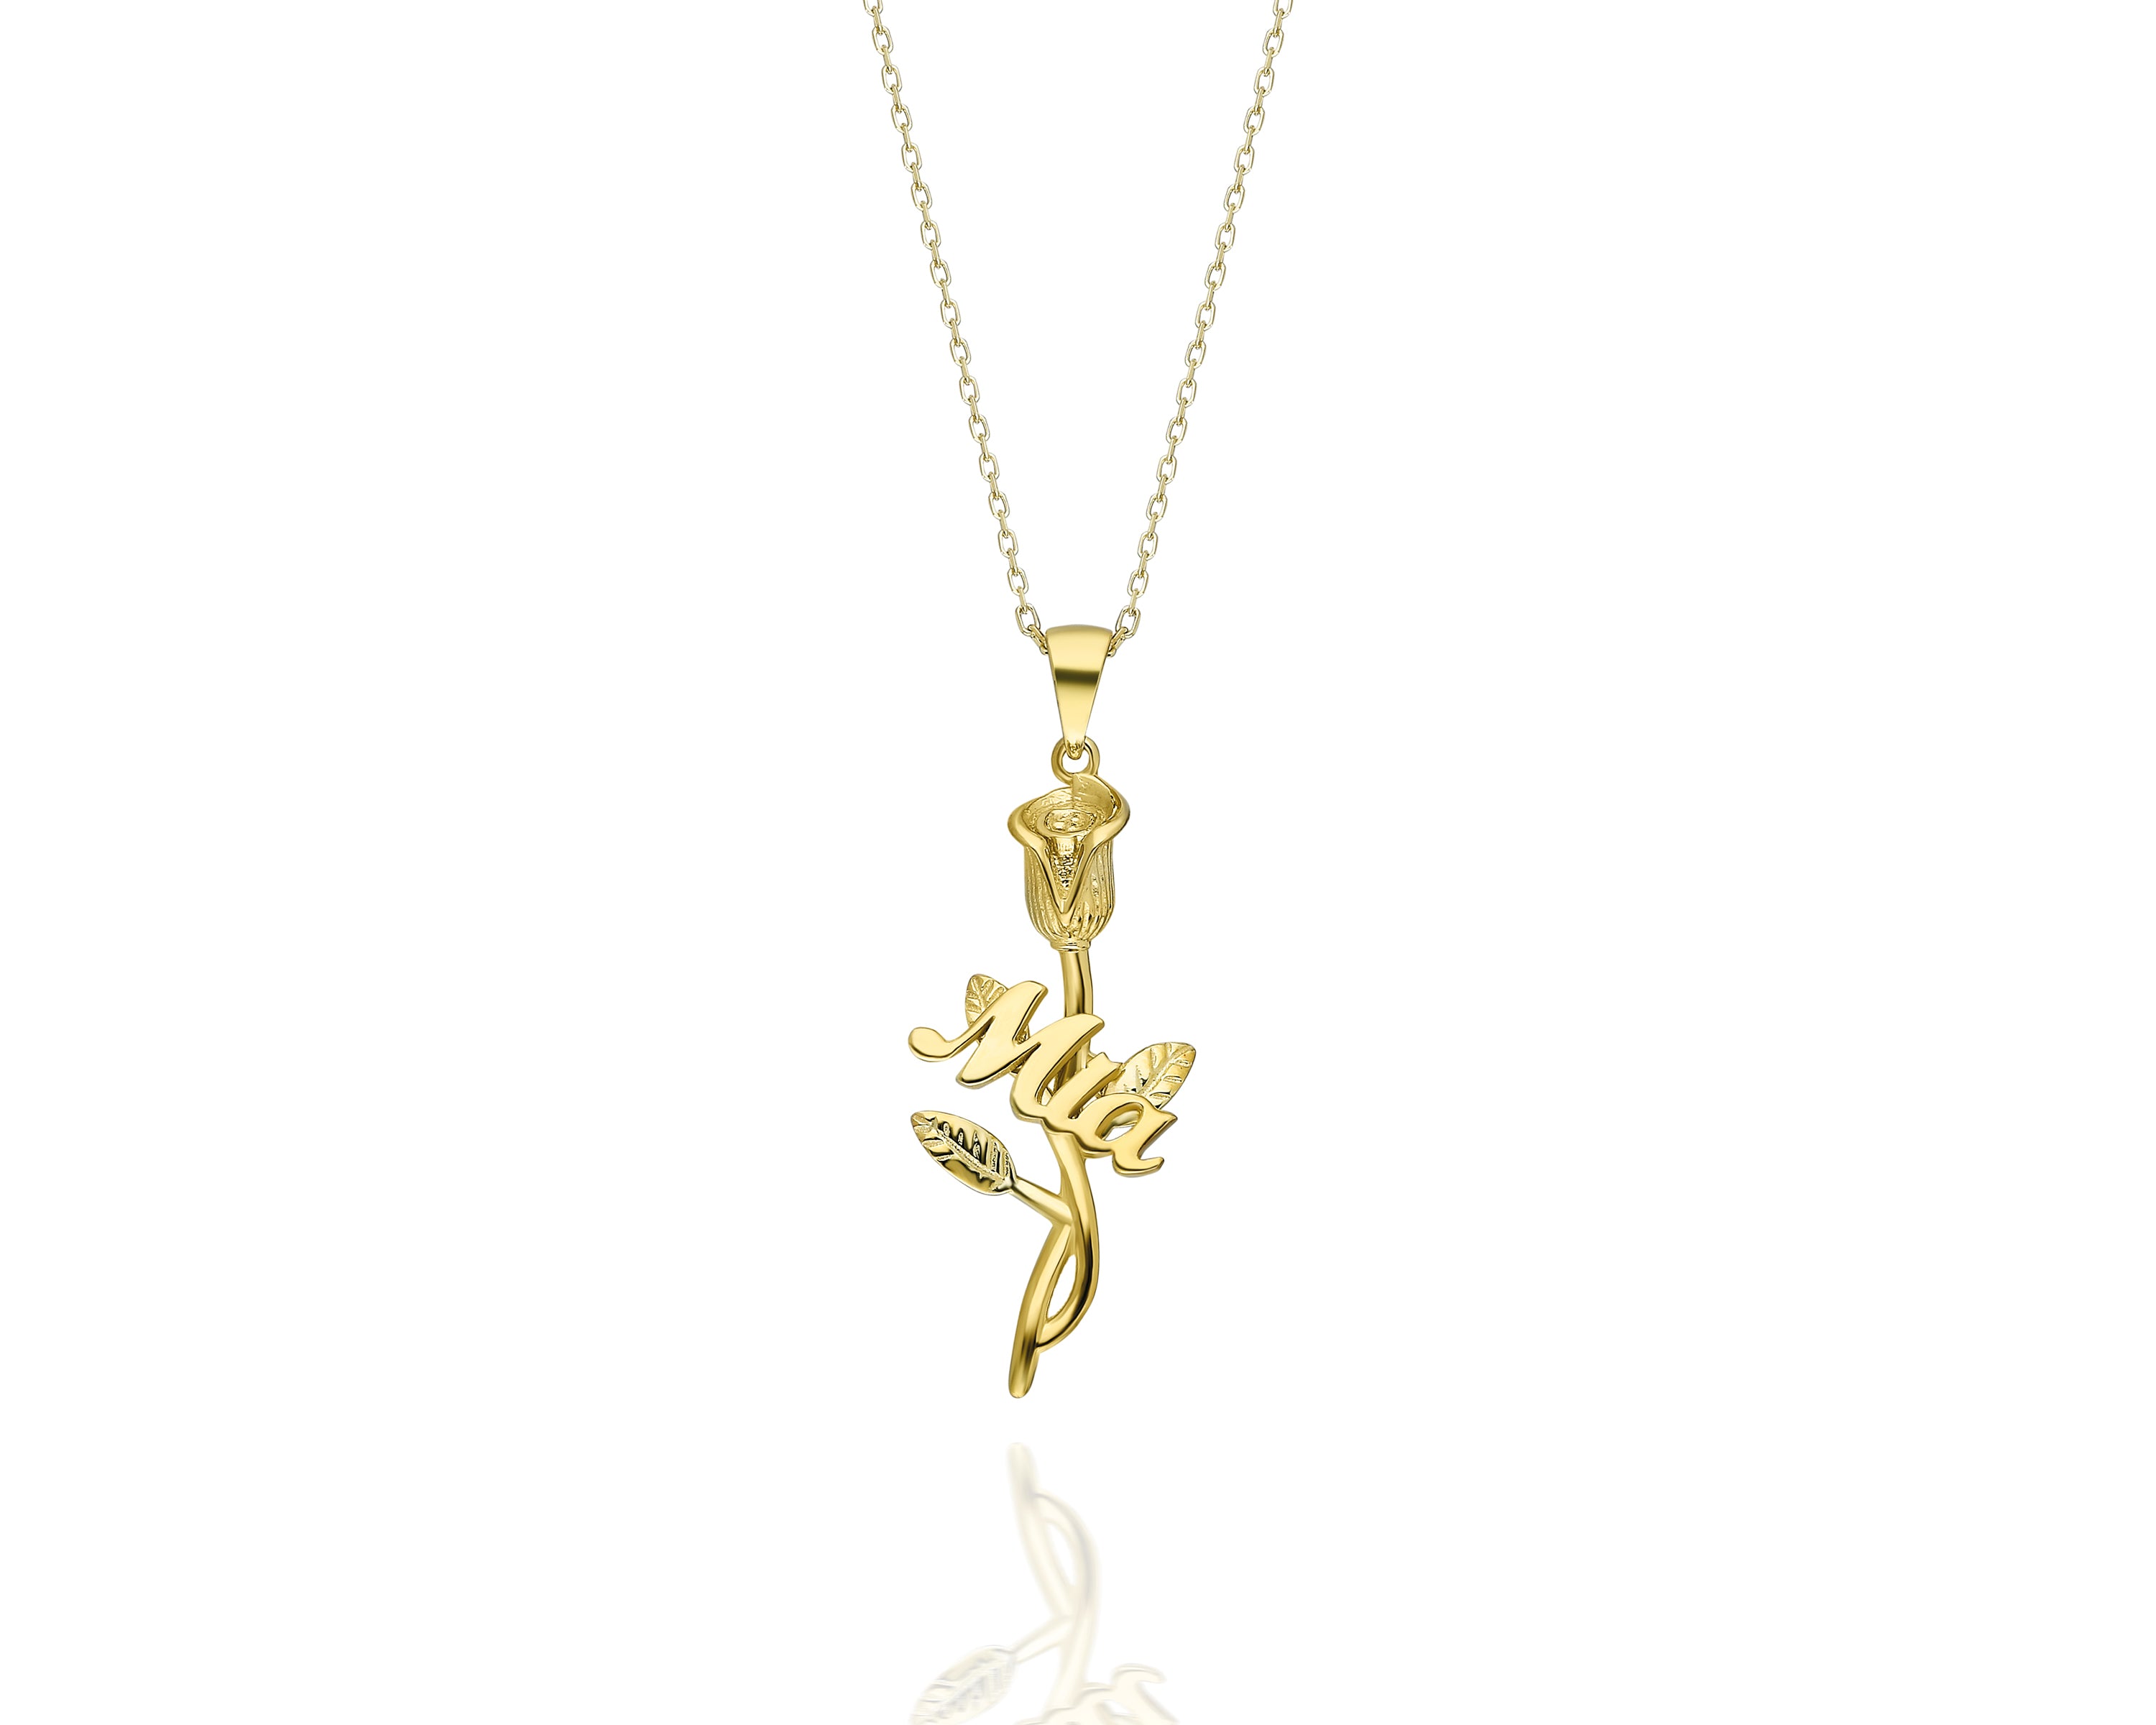 The Marigold 14K Gold Plated Custom Name Necklace